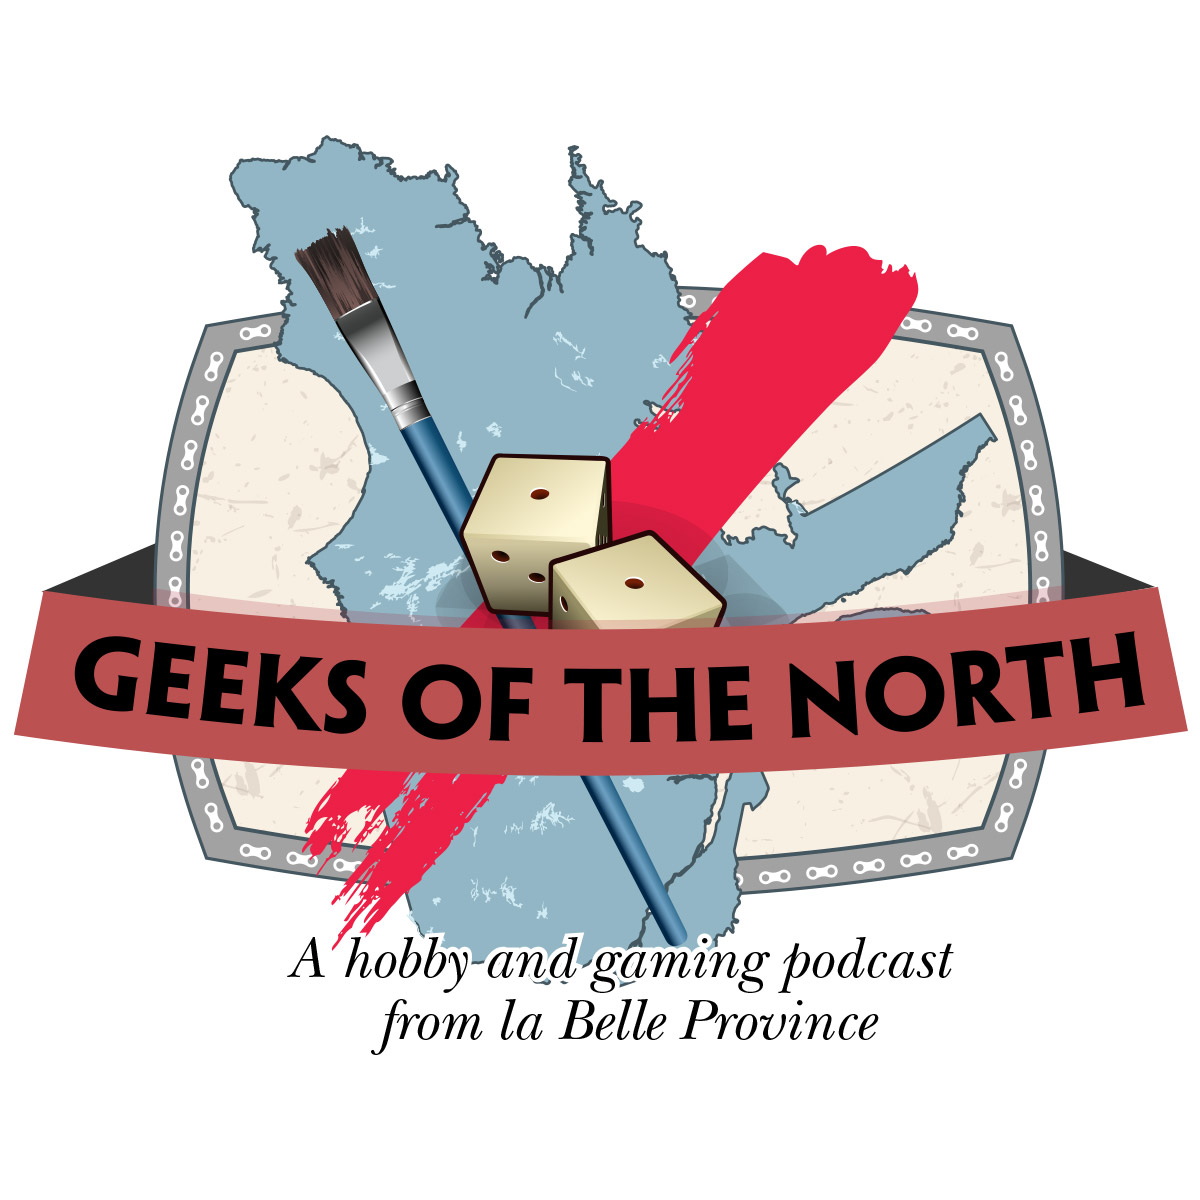 Geeks of the North